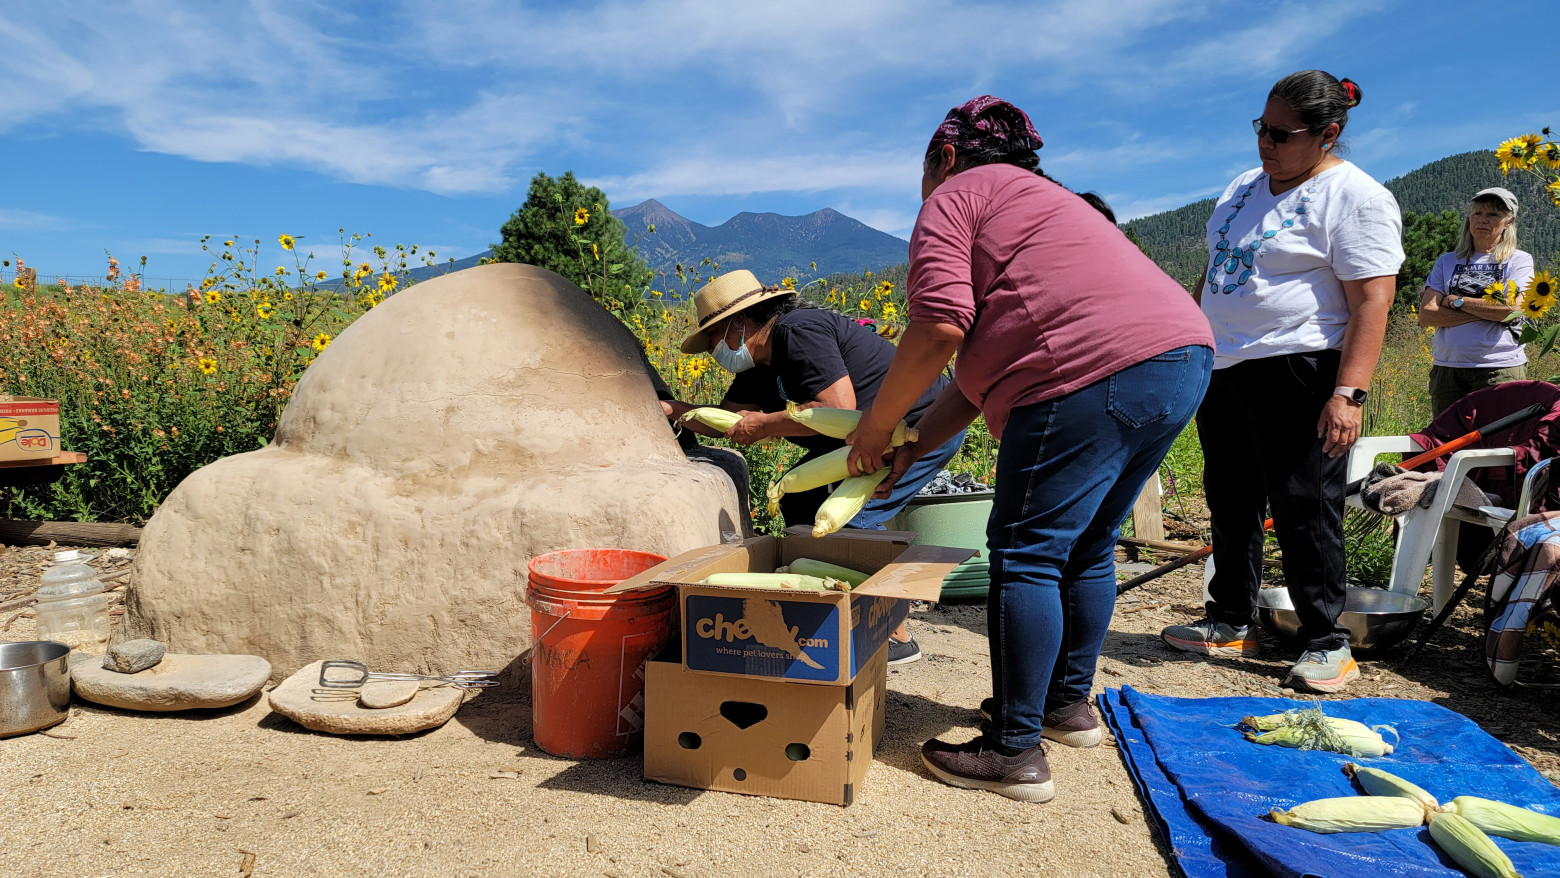 The women stand near a pueblo bread oven on a sunny day. Mountains are seen far in the distance.